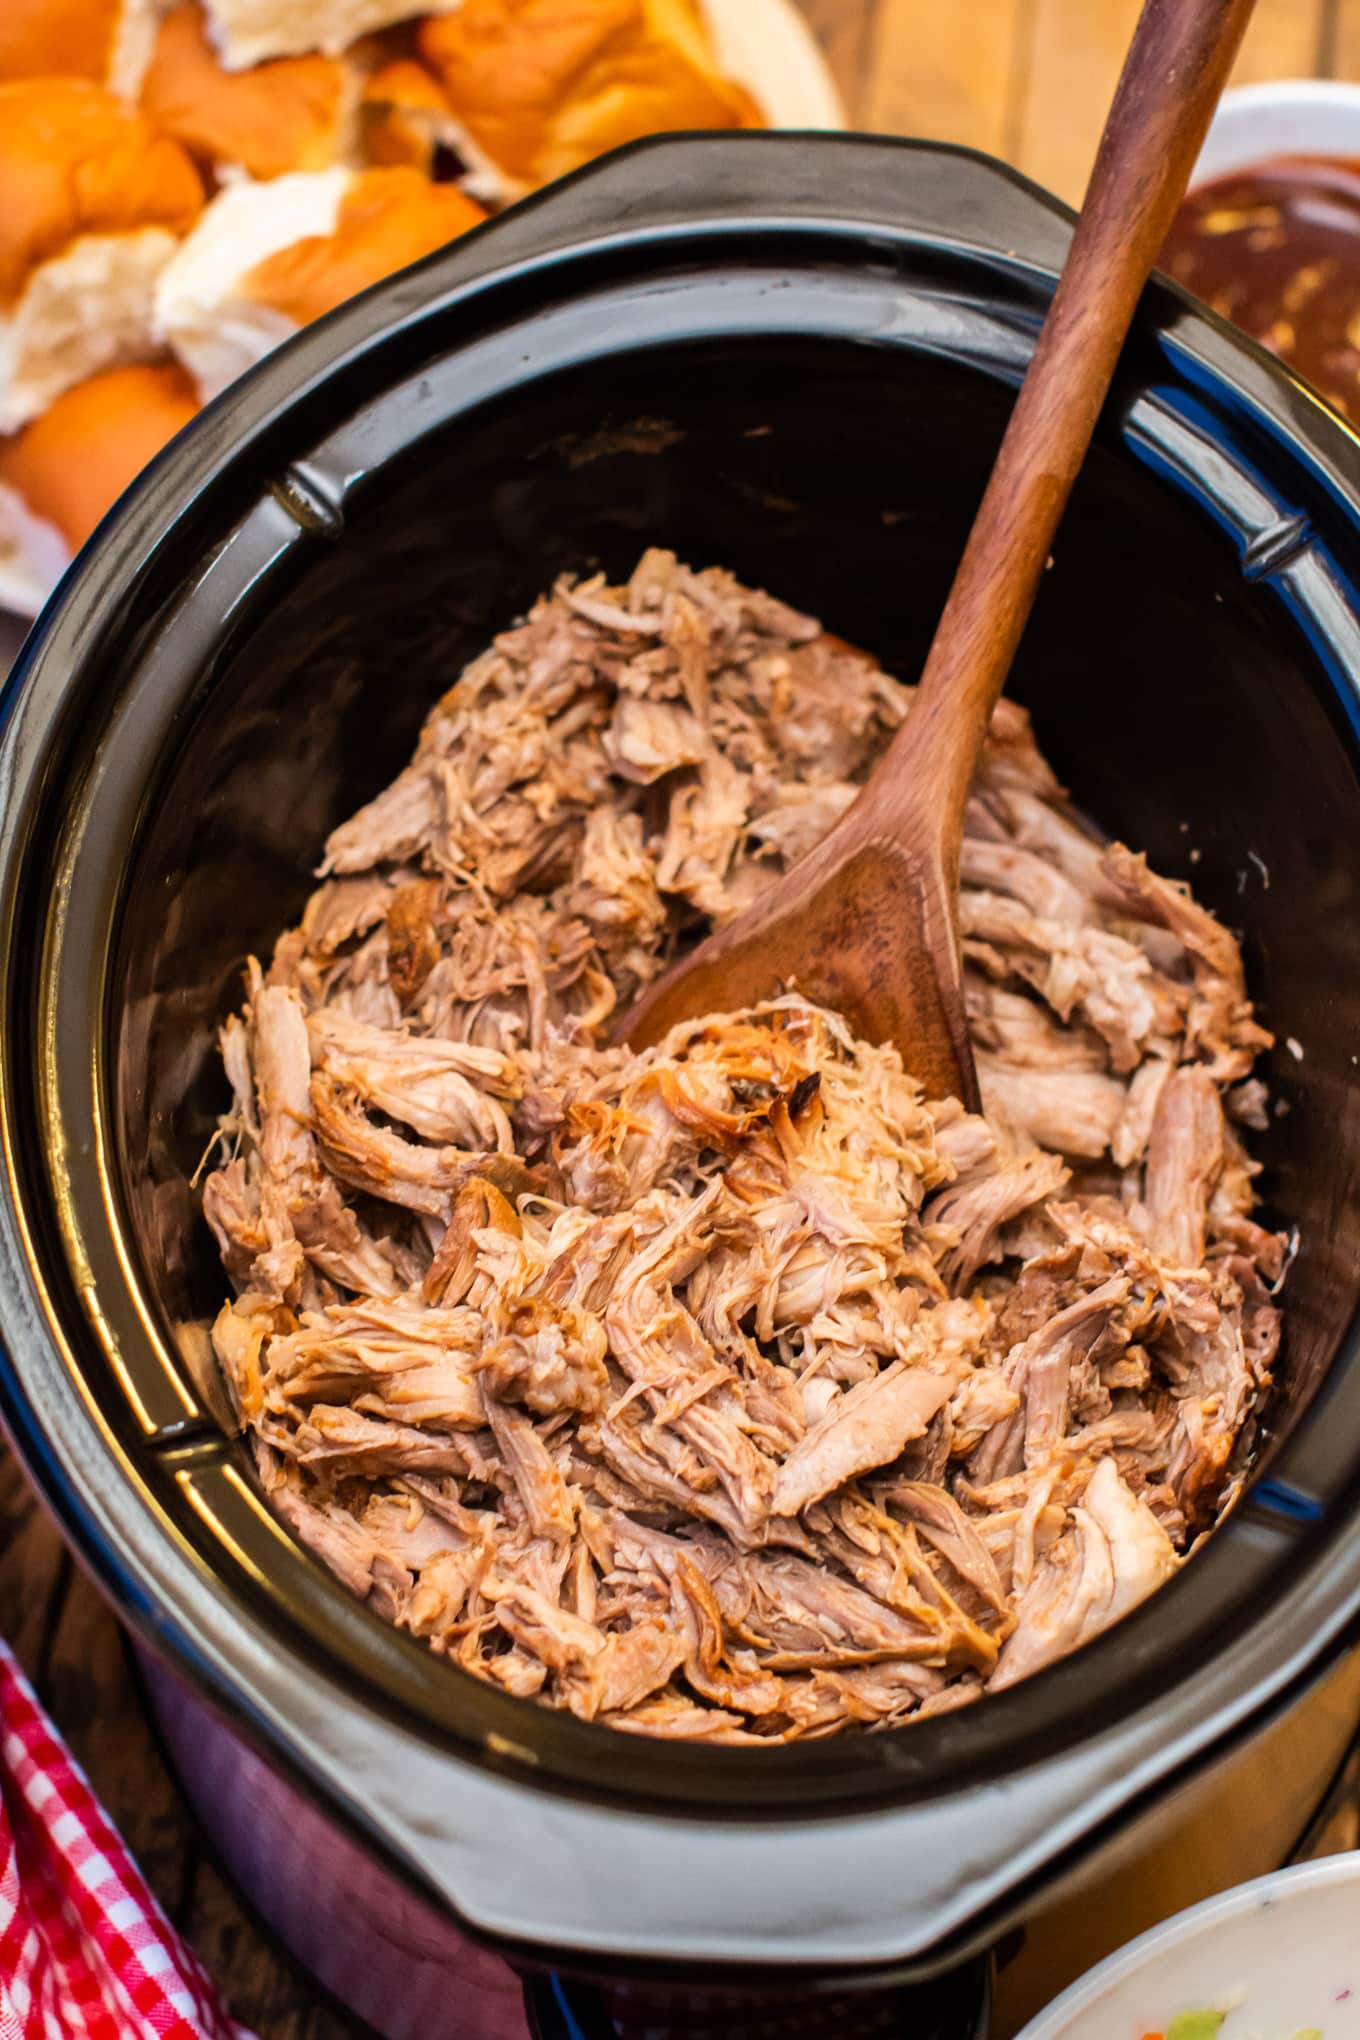 Easy Slow Cooker Pulled Pork Sandwiches The Magical Slow Cooker,Tulip Trees In Fall